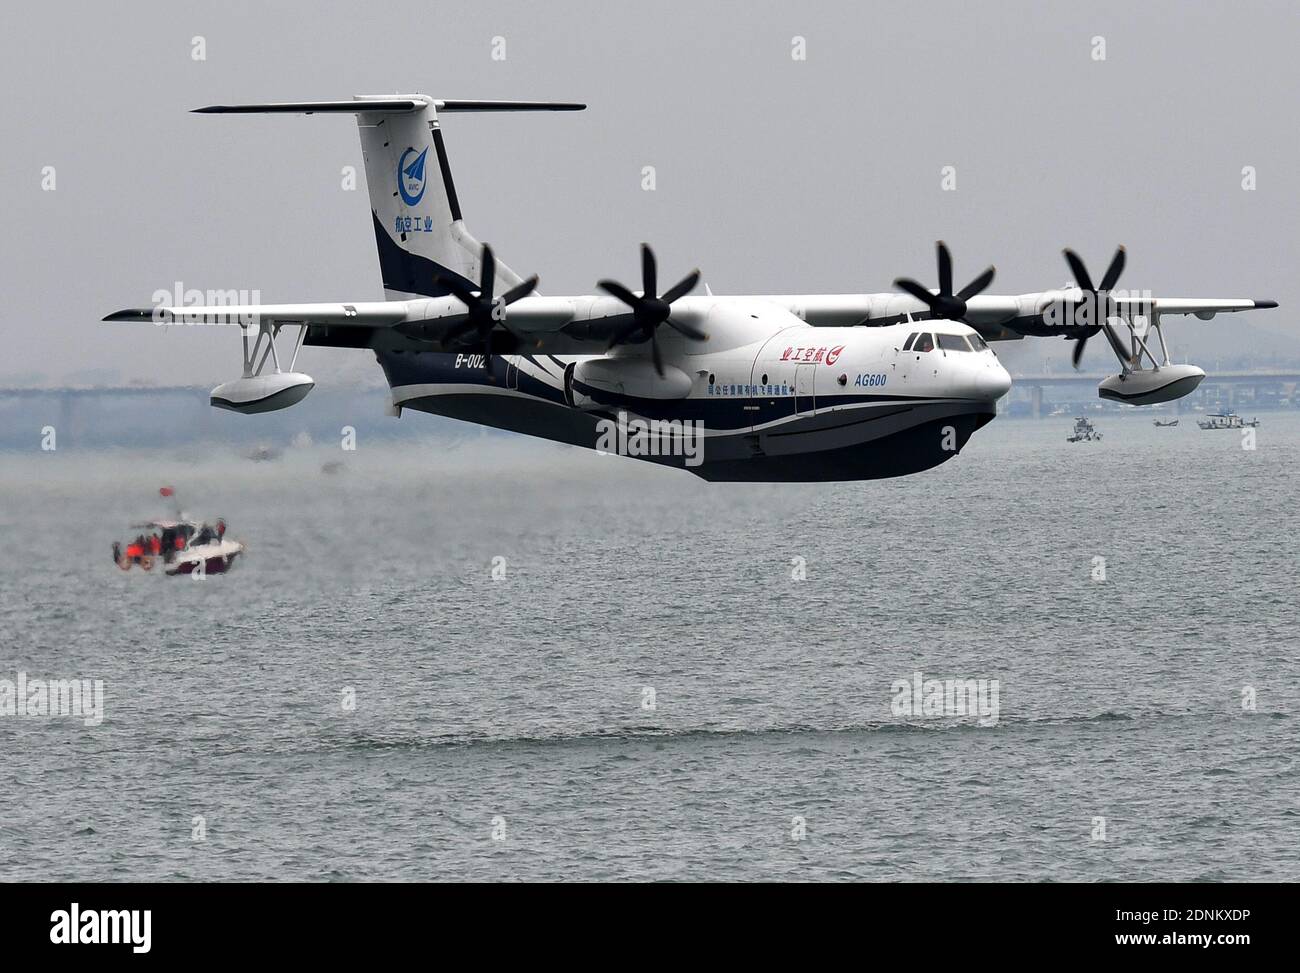 Beijing, China's Shandong Province. 26th July, 2020. An AG600 'Kunlong' amphibious aircraft flies over the sea off Qingdao, east China's Shandong Province, July 26, 2020. China's indigenously developed AG600 large amphibious aircraft succeeded in its maiden flight over sea in Qingdao. Credit: Li Ziheng/Xinhua/Alamy Live News Stock Photo